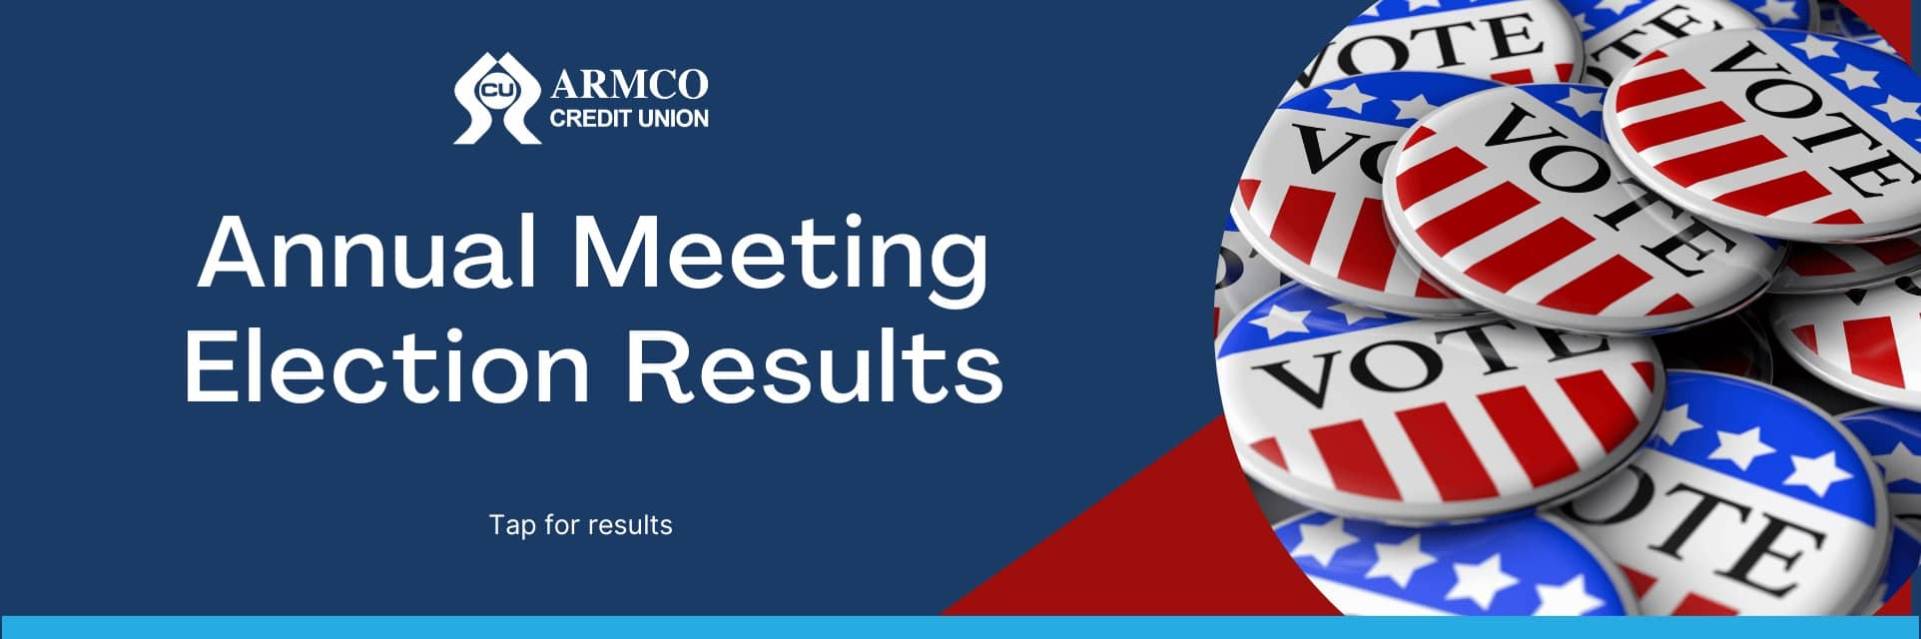 Annual Meeting Election Results